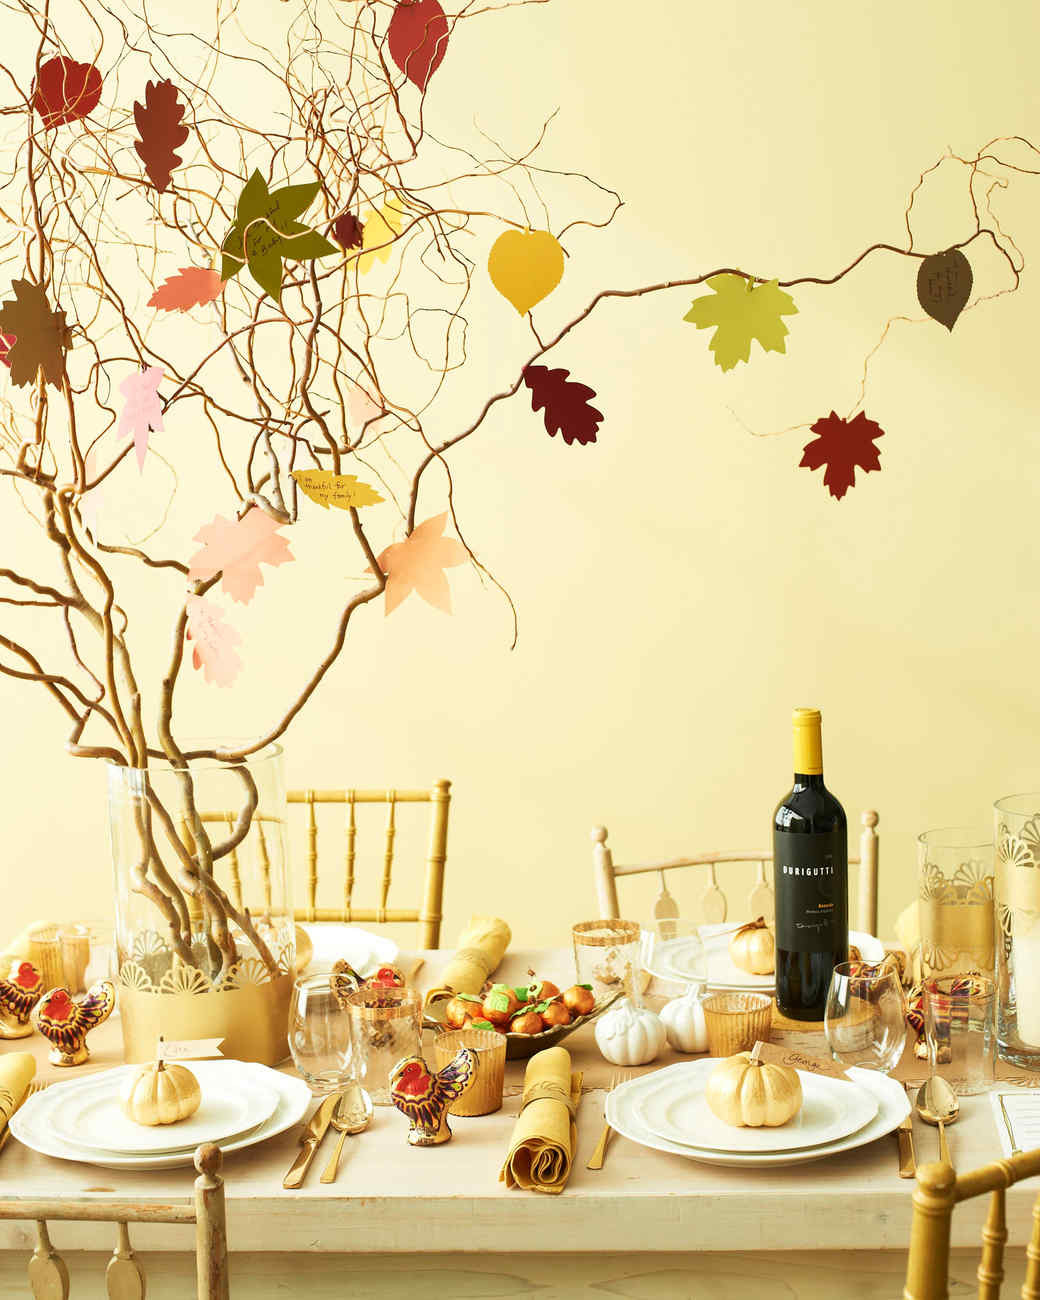 Martha Stewart Thanksgiving Turkey
 Tree Centerpieces Time to Branch Out with Your Table